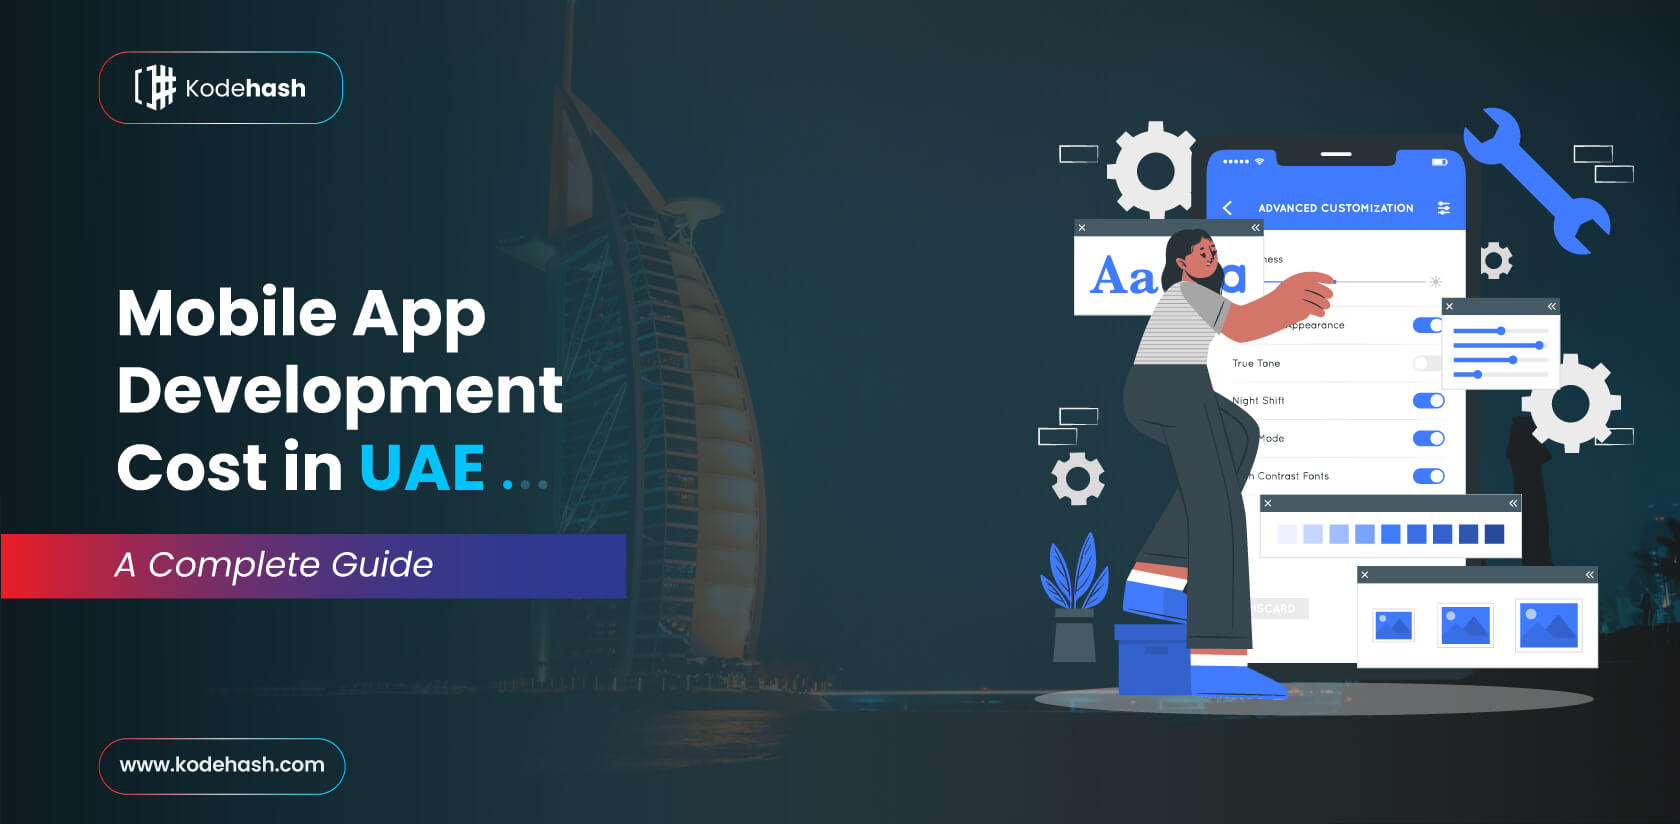 Why Kodehash is the Best Application Development Company in UAE